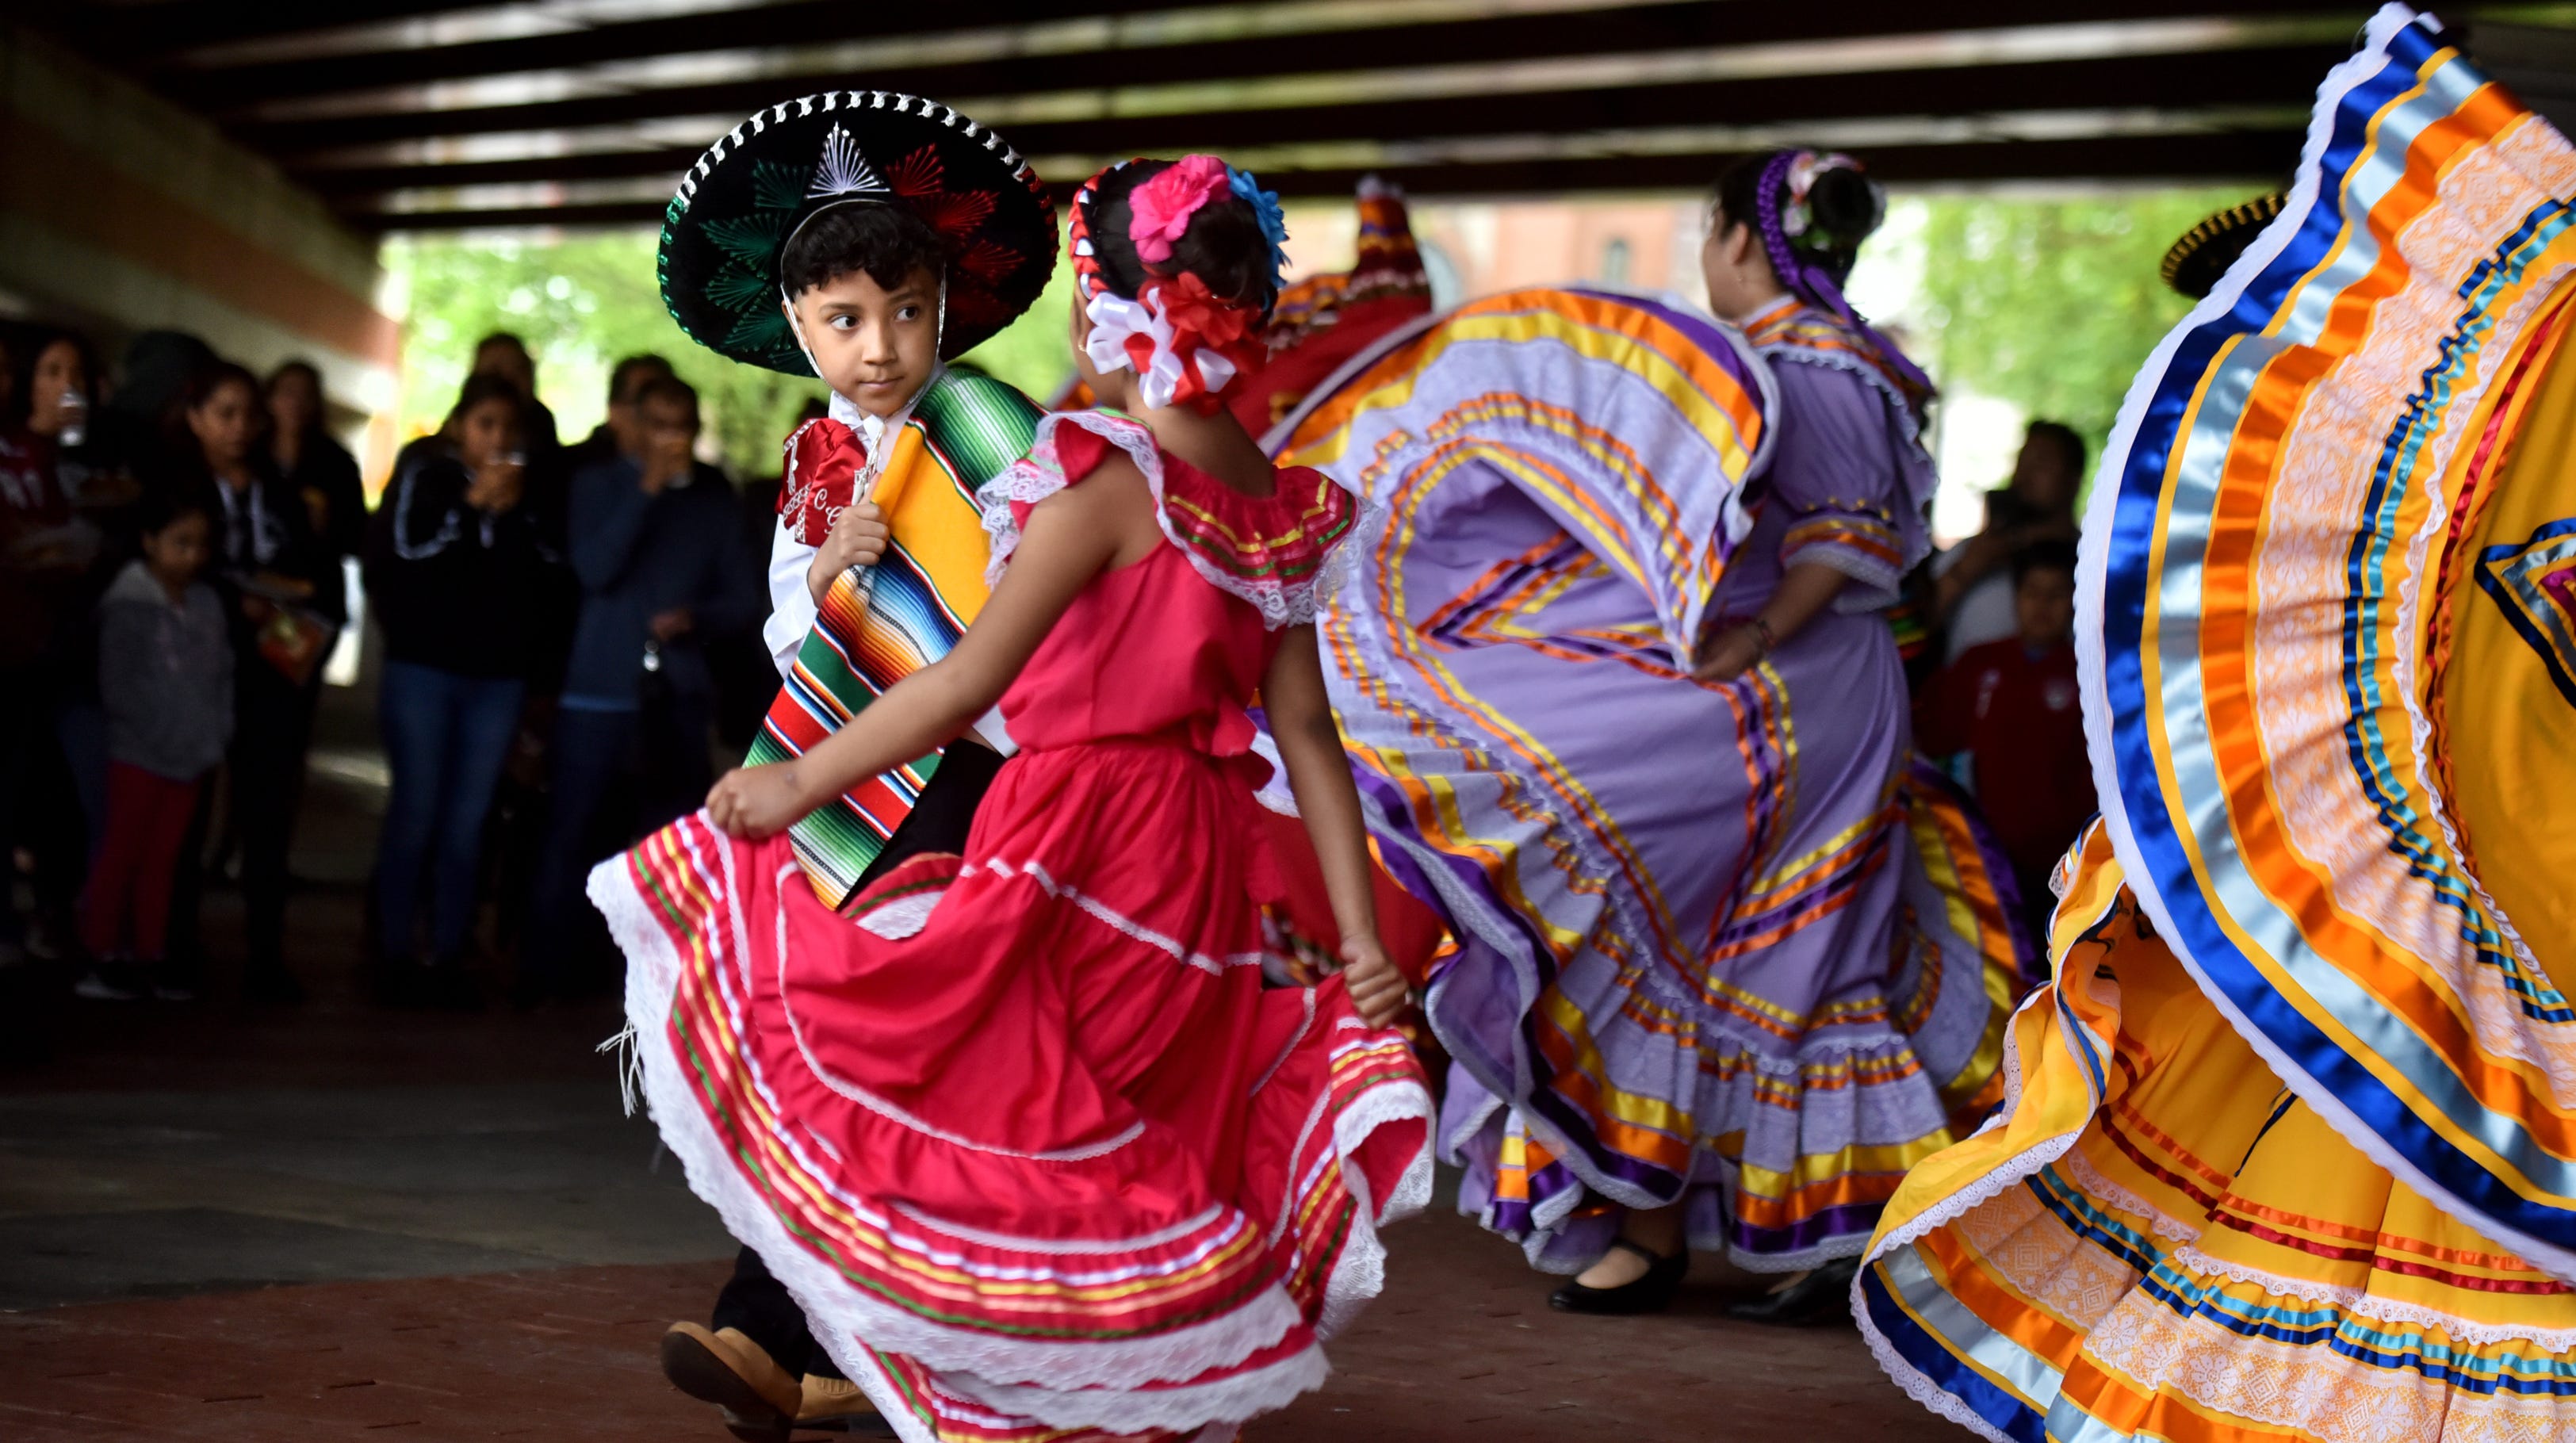 Free download wallpaper Photography, Mexican, Dancing on your PC desktop